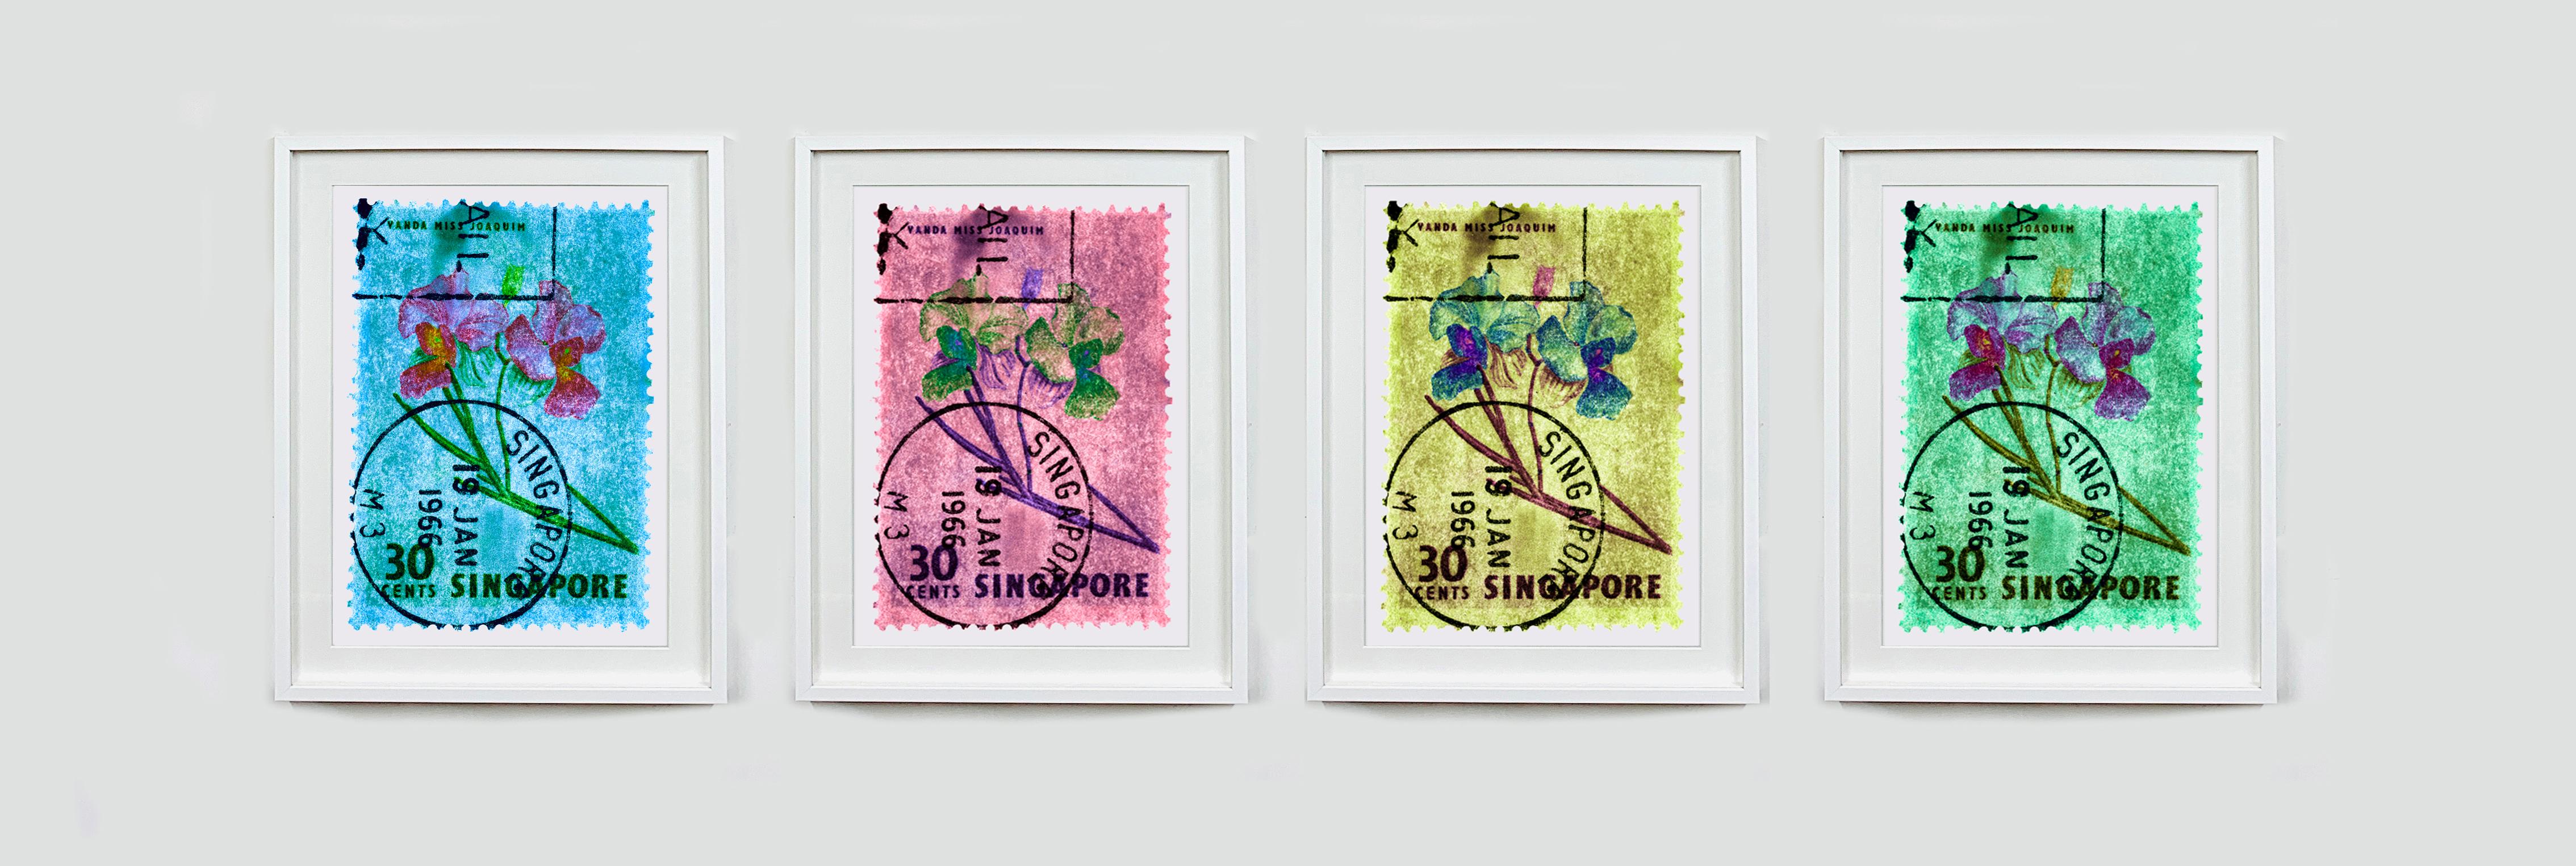 Singapore Stamp Collection, 30c Singapore Orchid Green - Floral color photo For Sale 1